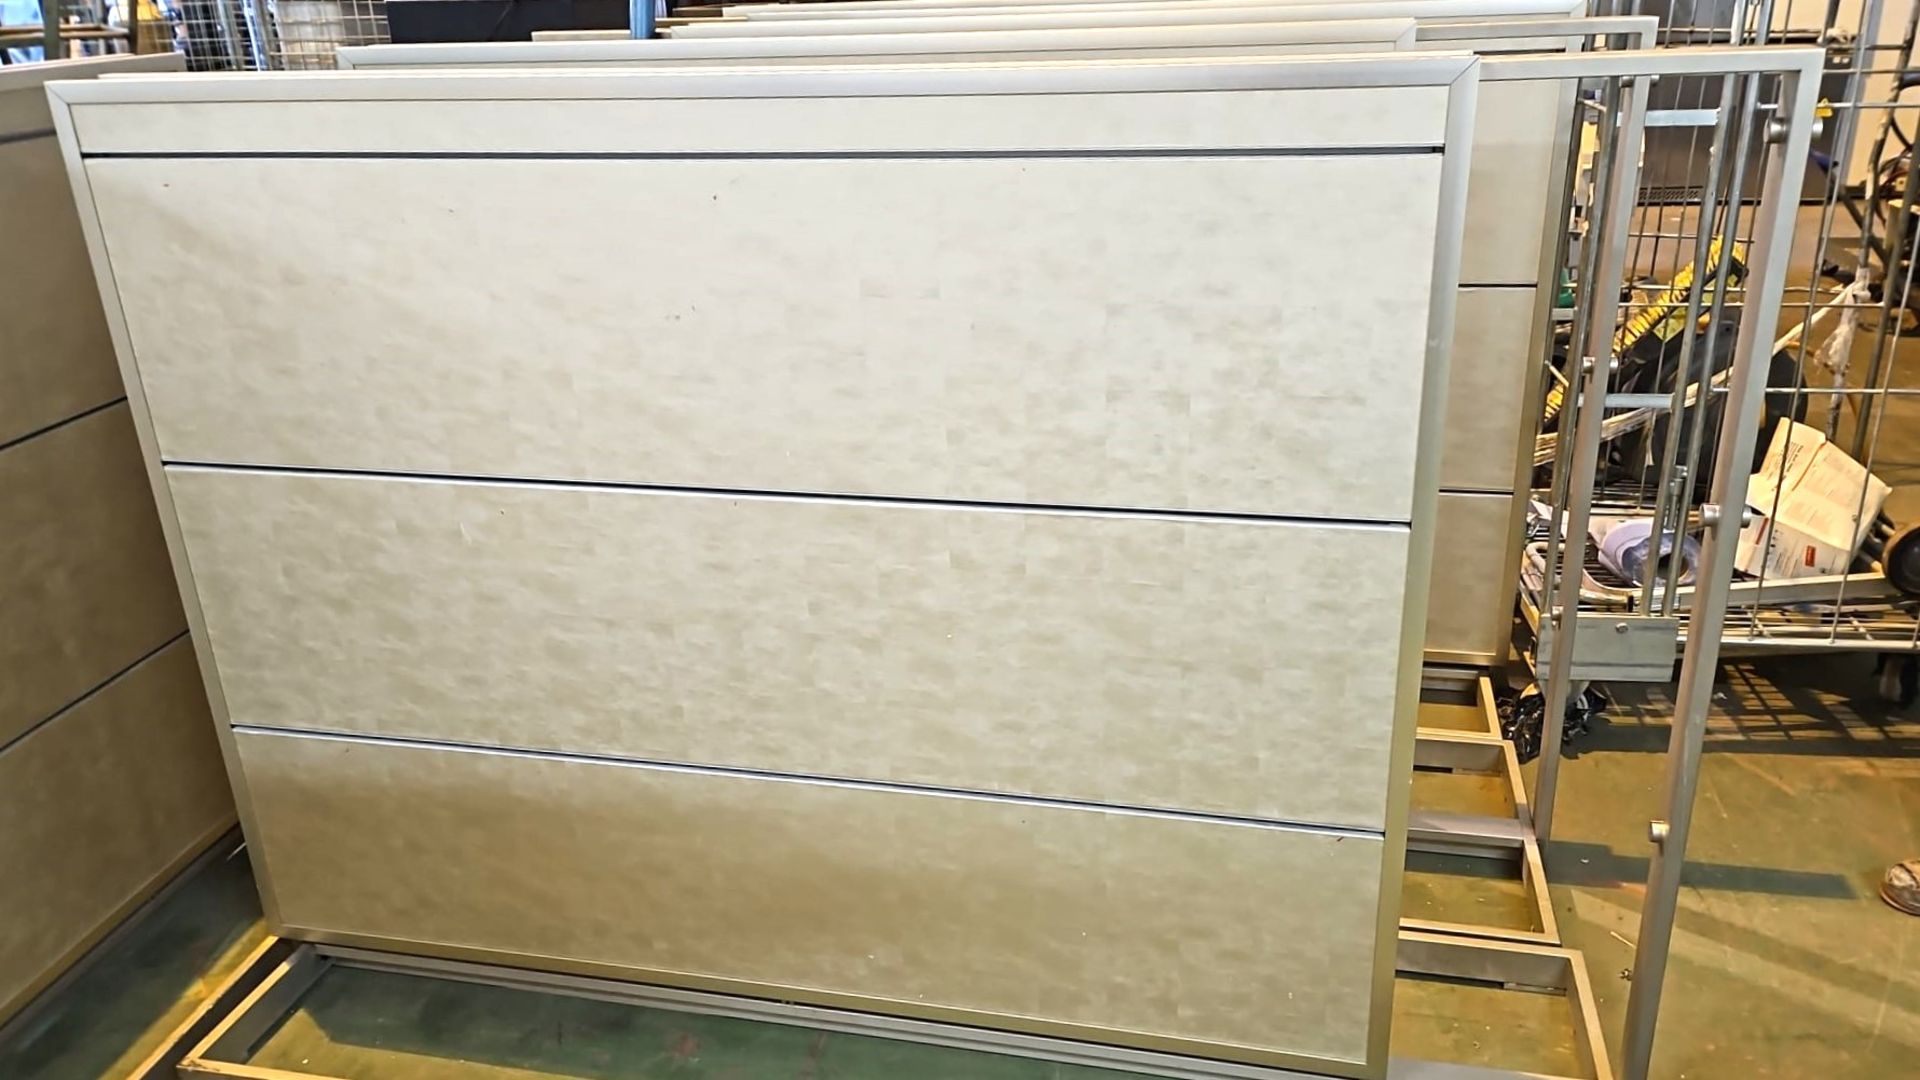 2 x Freestanding Retail Display Slat Walls Featuring a Light Wood Finish, Metal Surround and